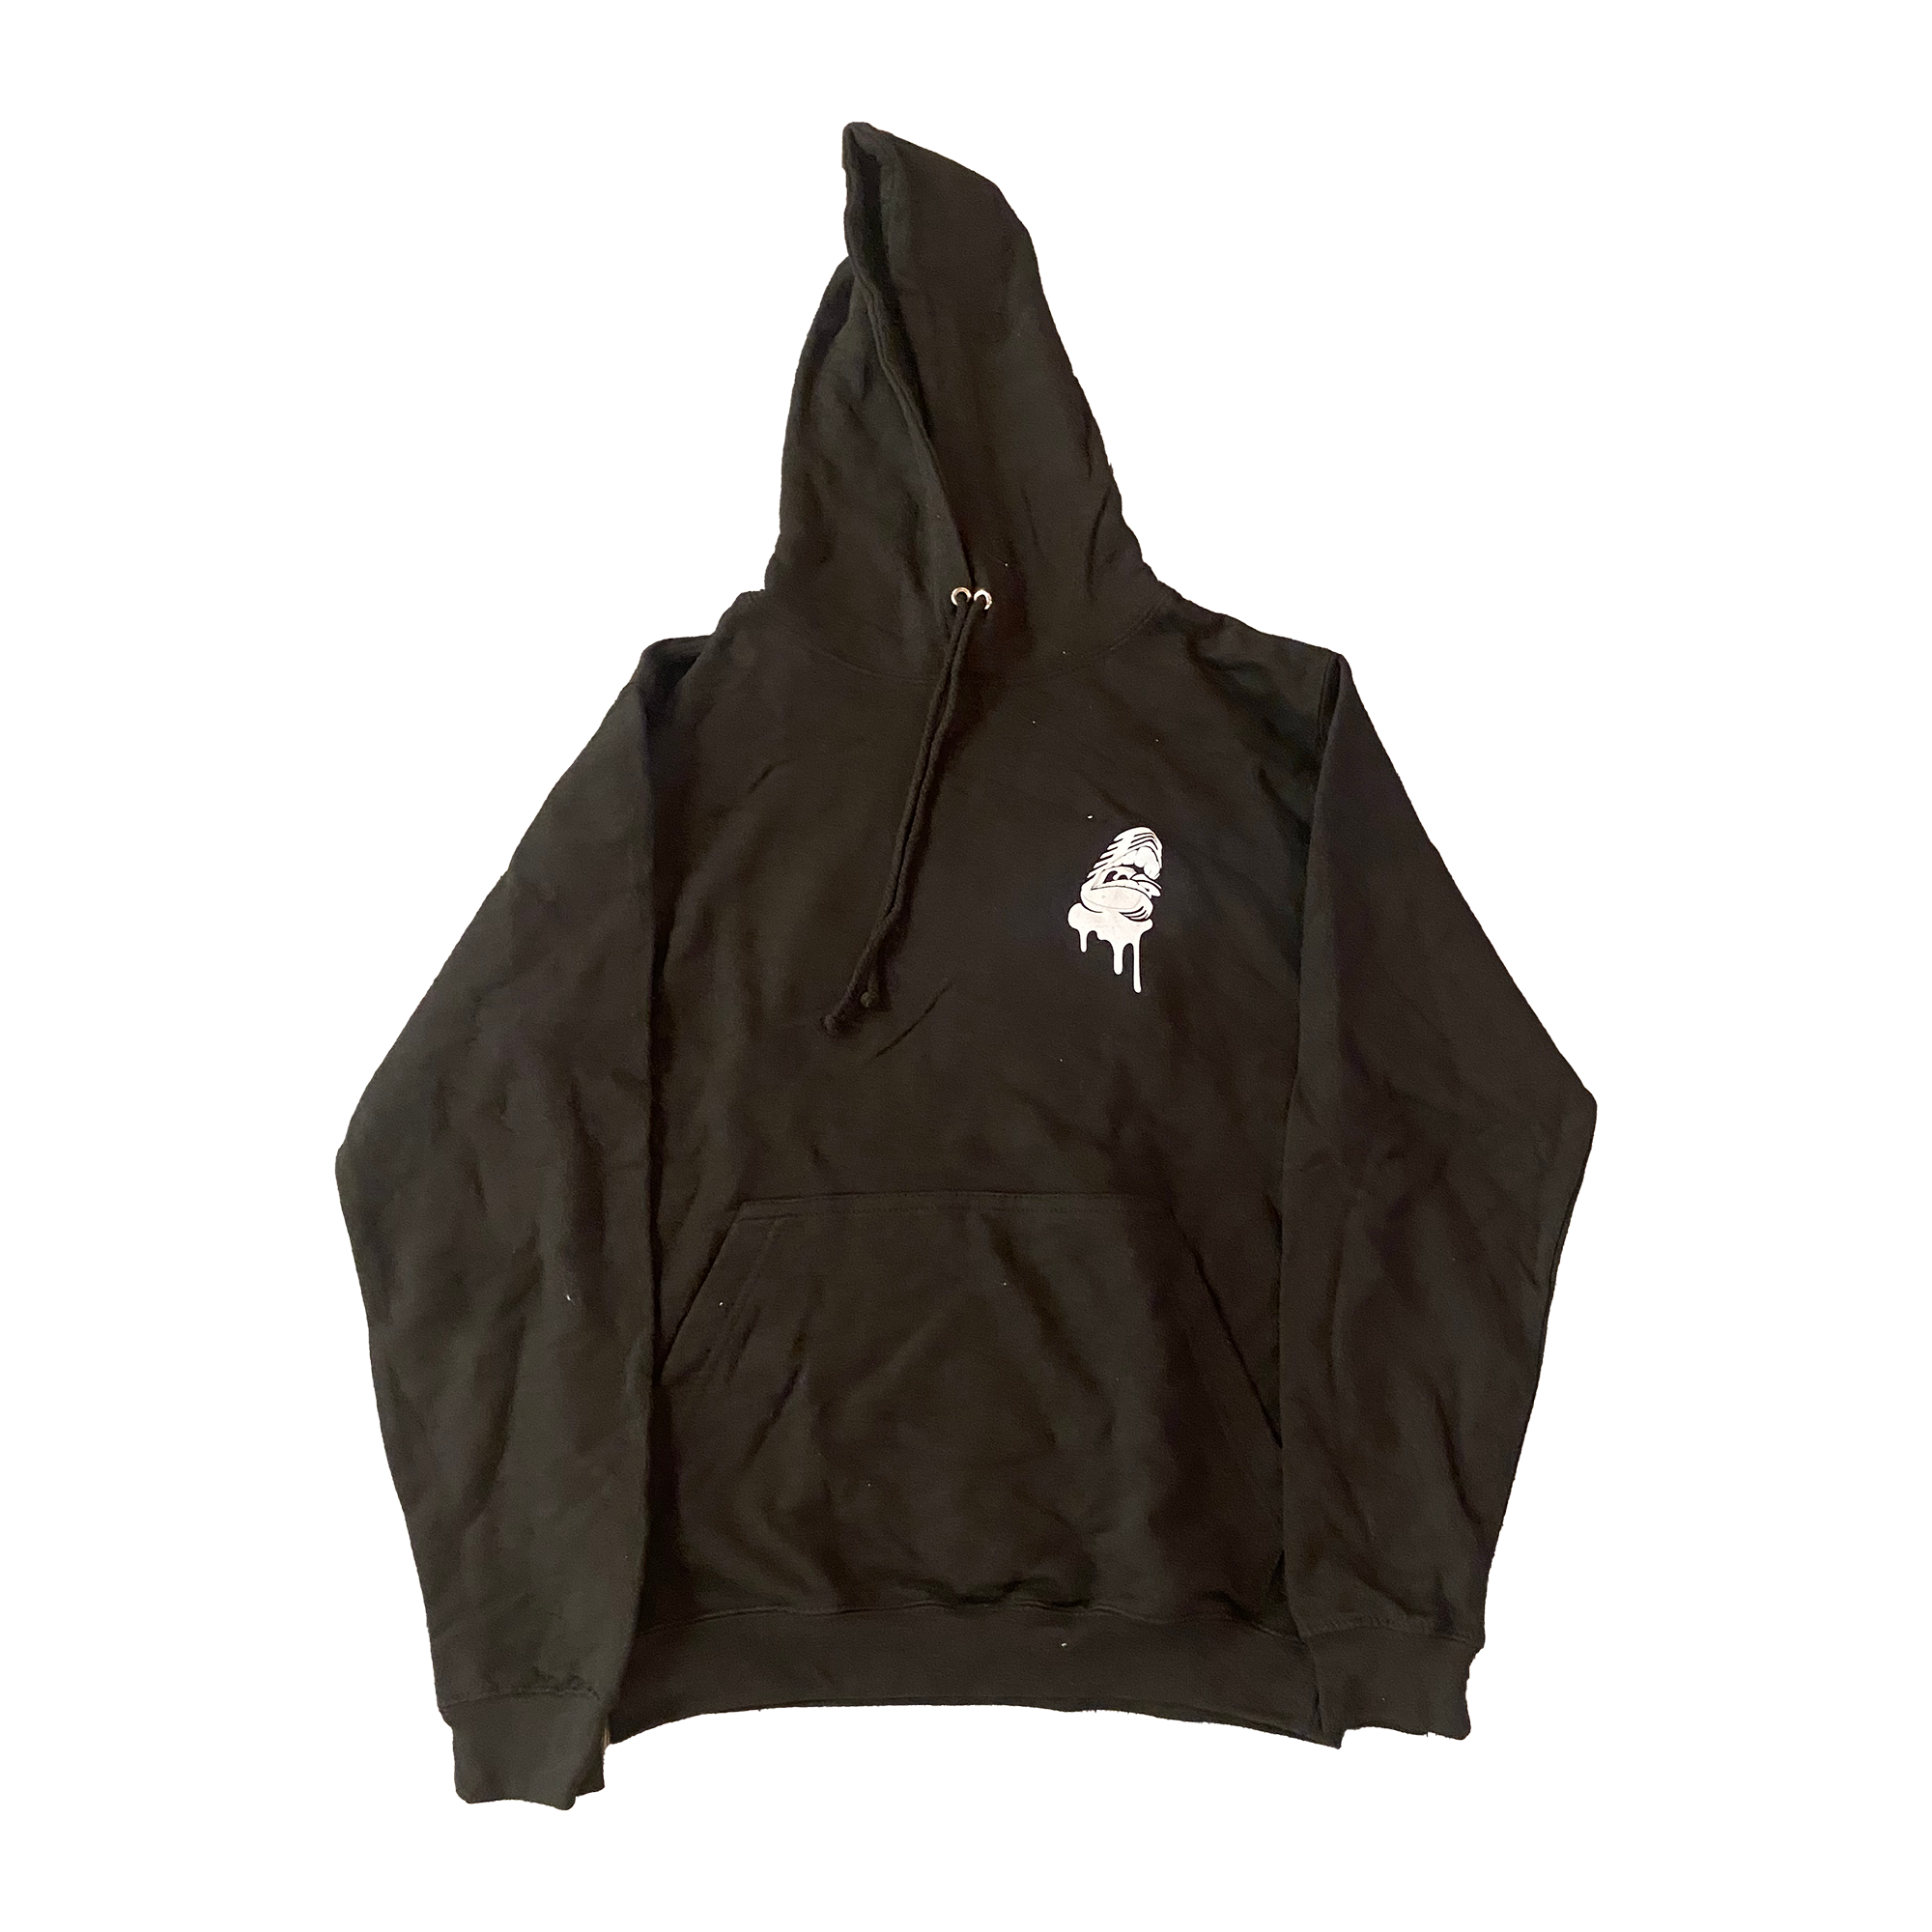 Live In Real Life Hoodie